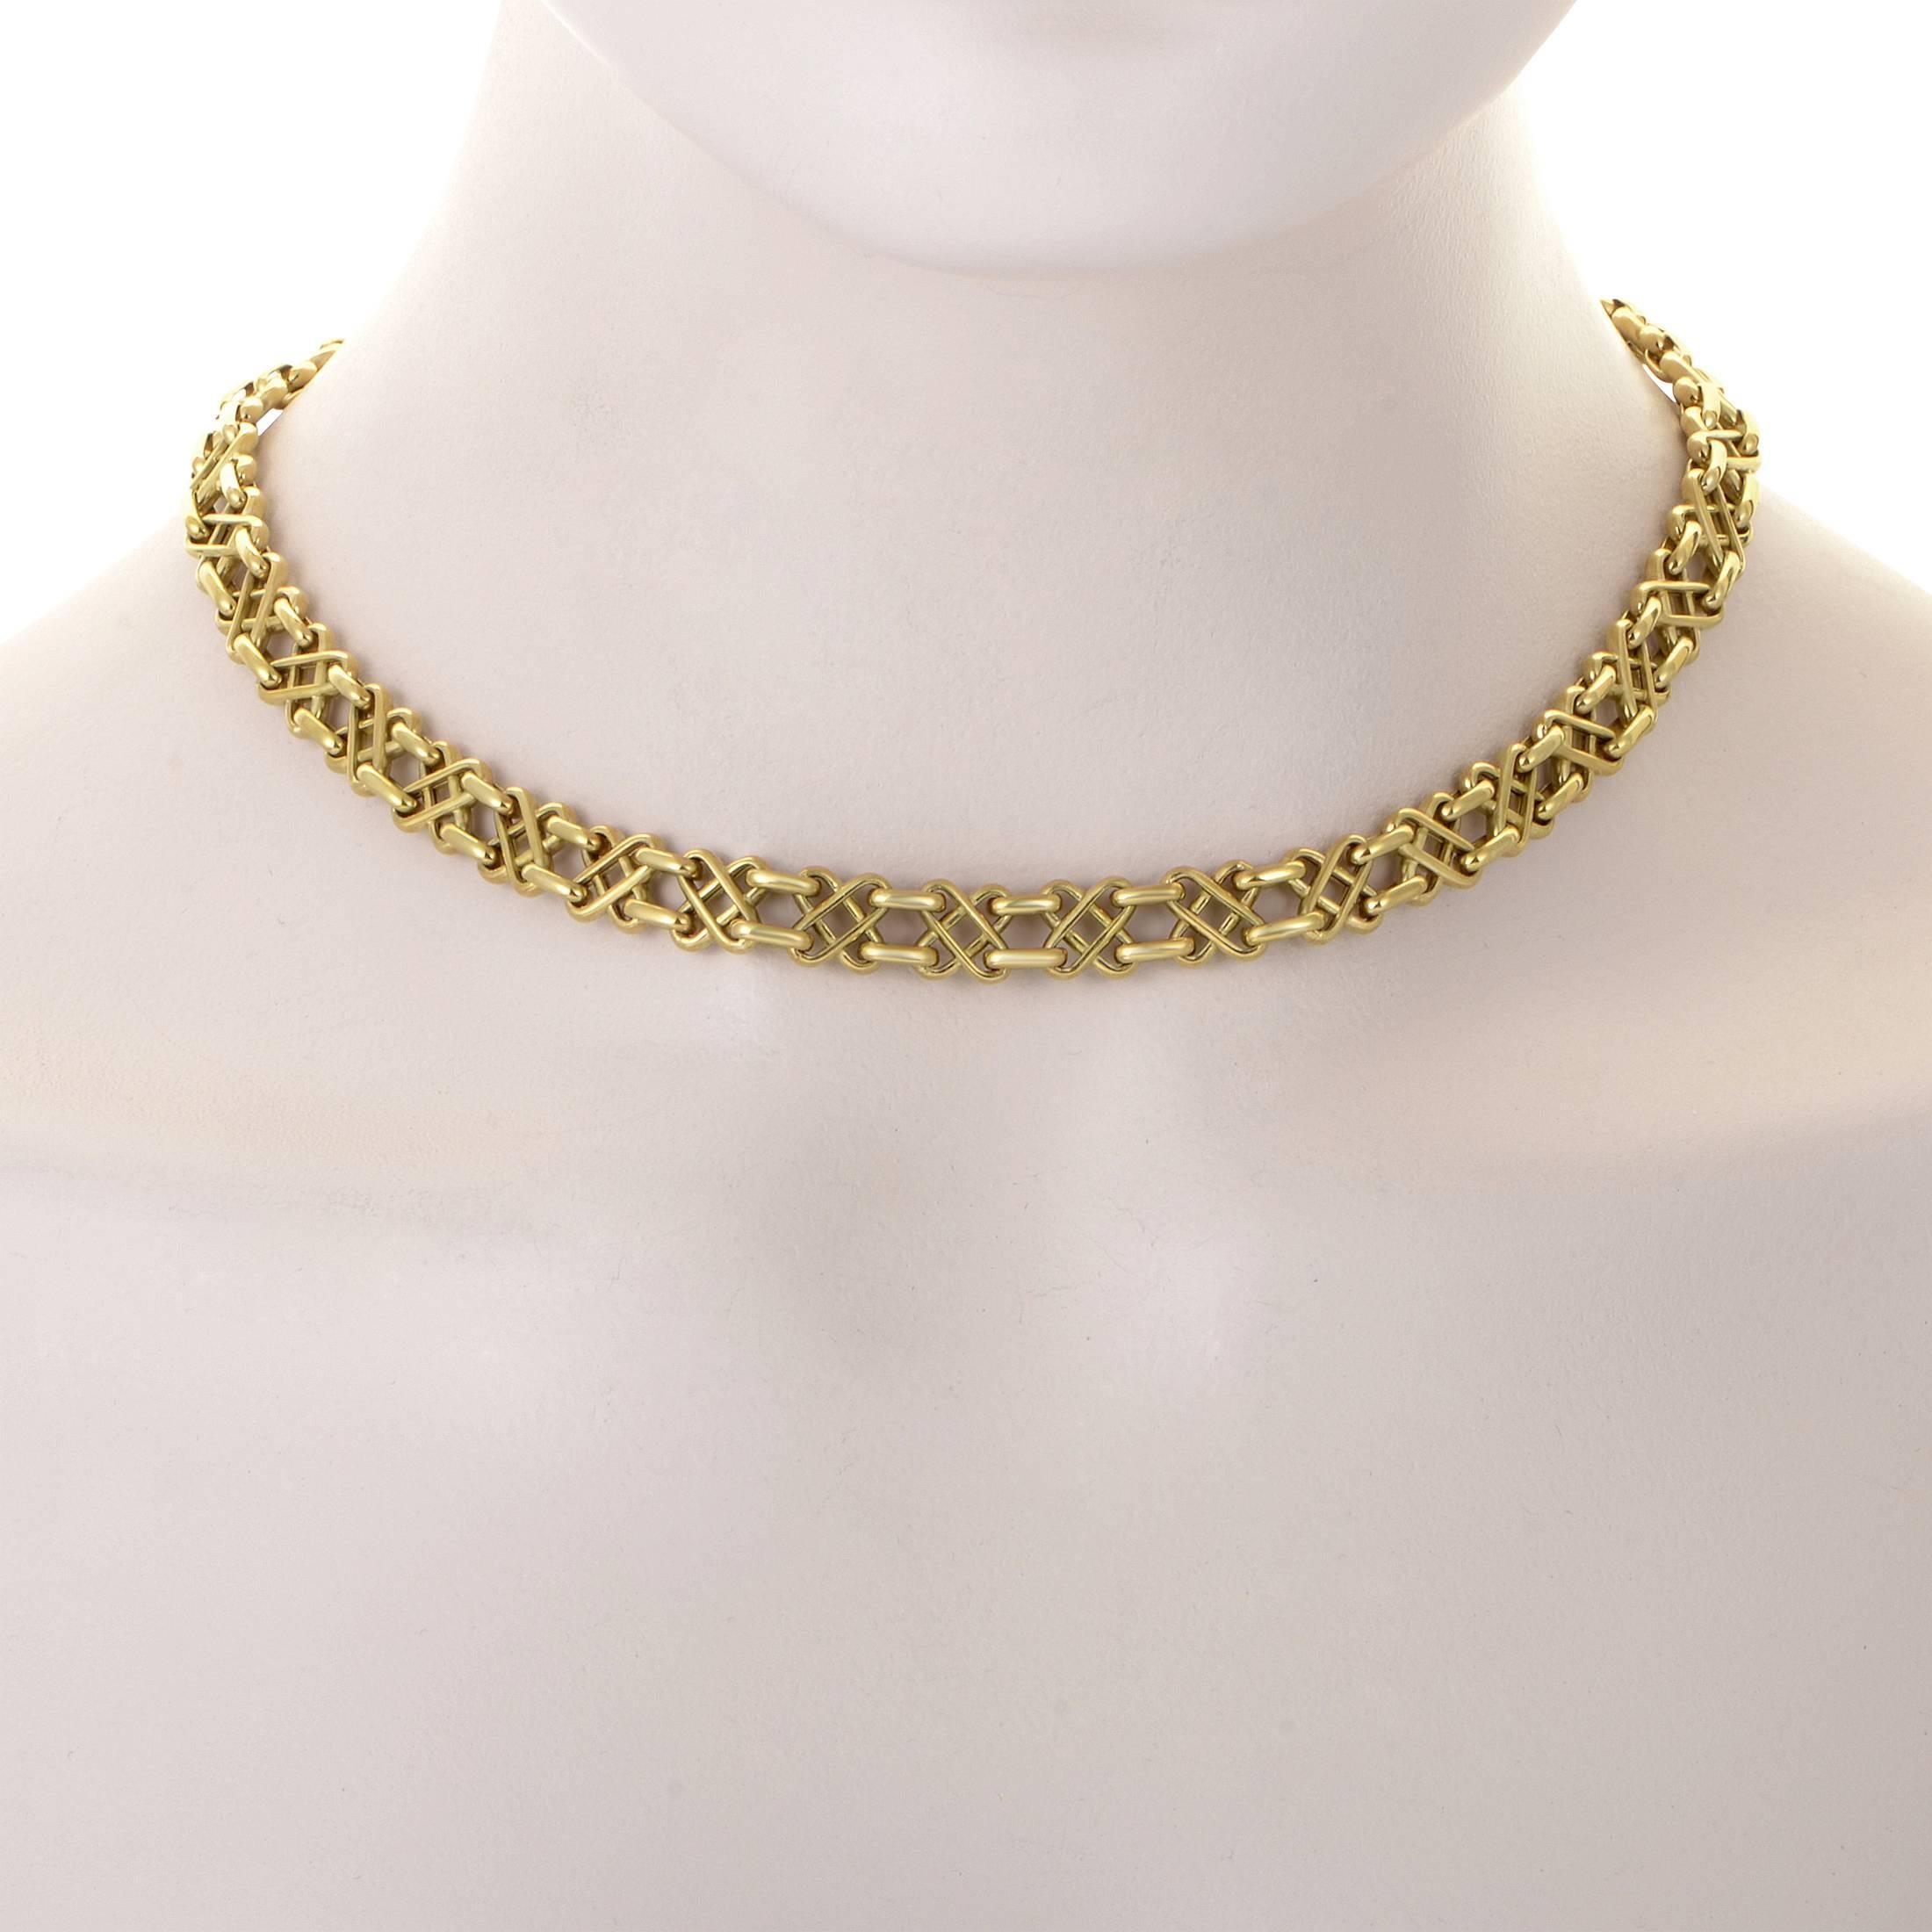 Magnificent elegance and fabulous radiance captivate at the very first sight while the amazingly intricate design and exquisite craftsmanship are revealed upon a closer look at this remarkable 18K yellow gold necklace from Tiffany & Co.
Included